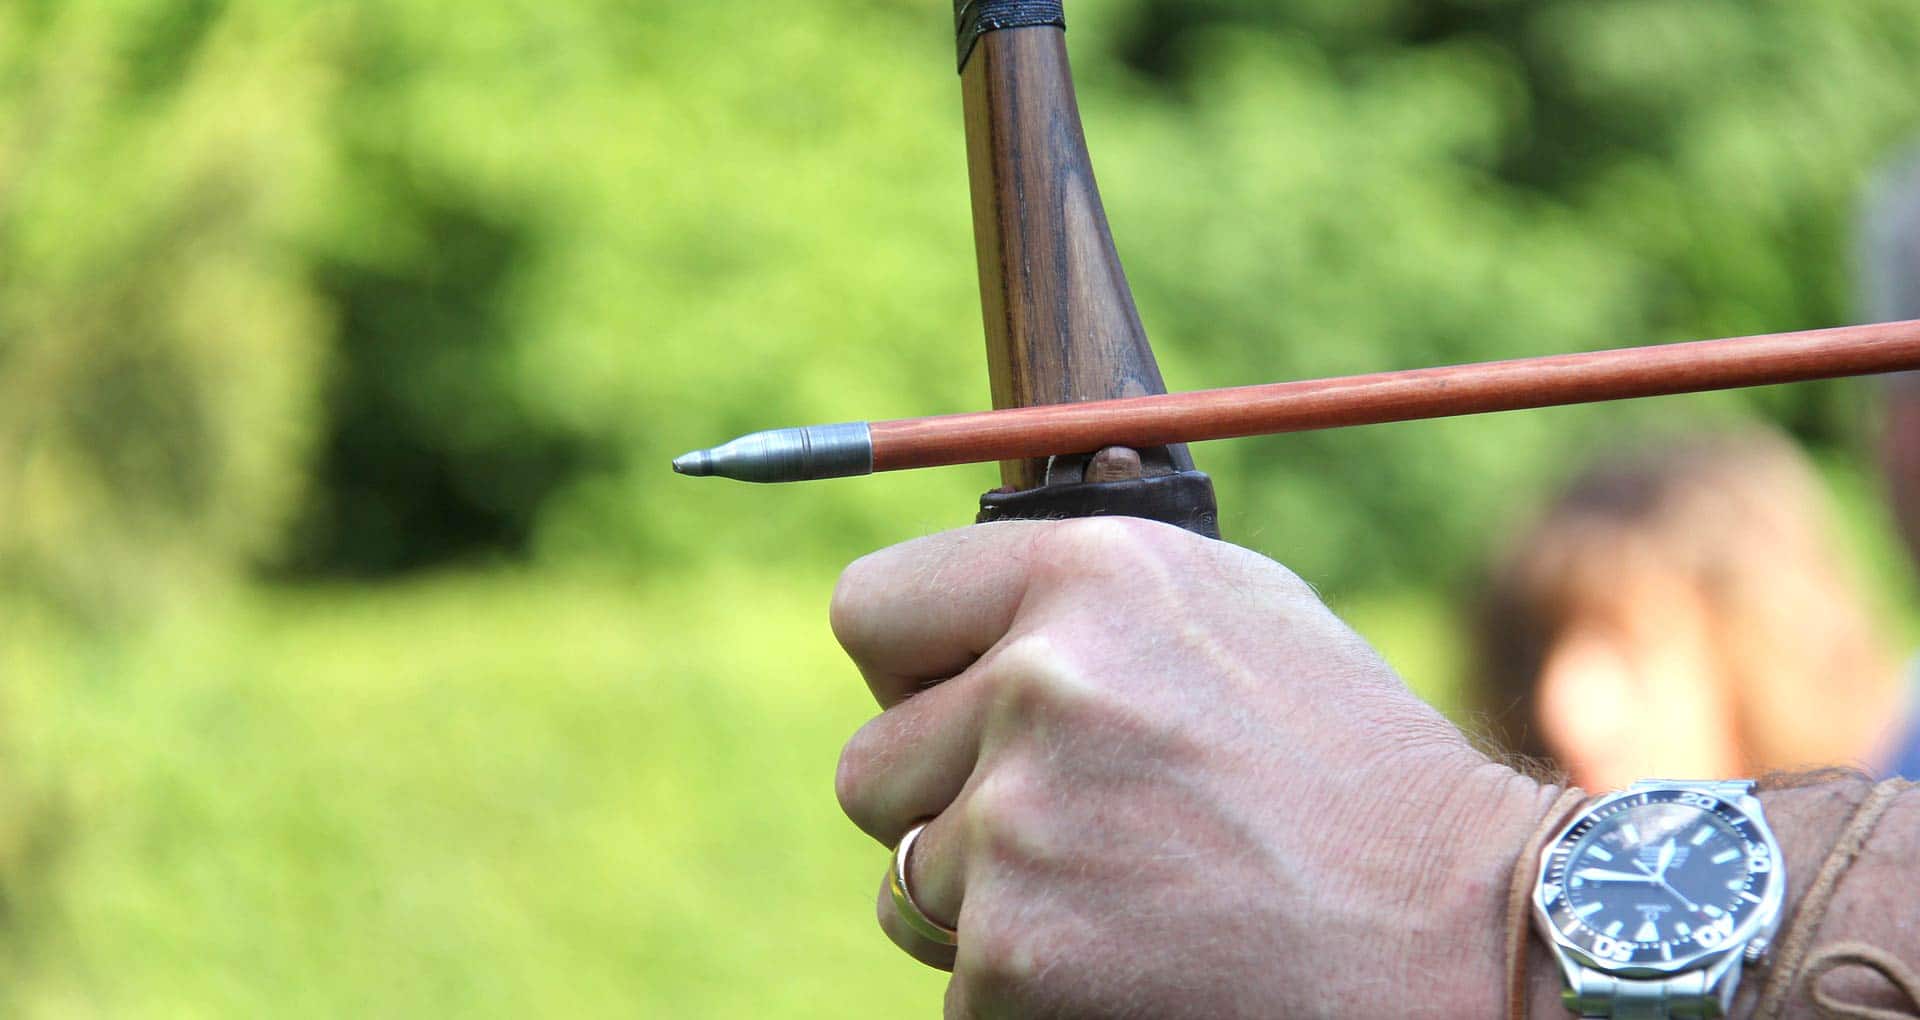 Choosing The Right Type Of Arrow Tips Archery for Beginners